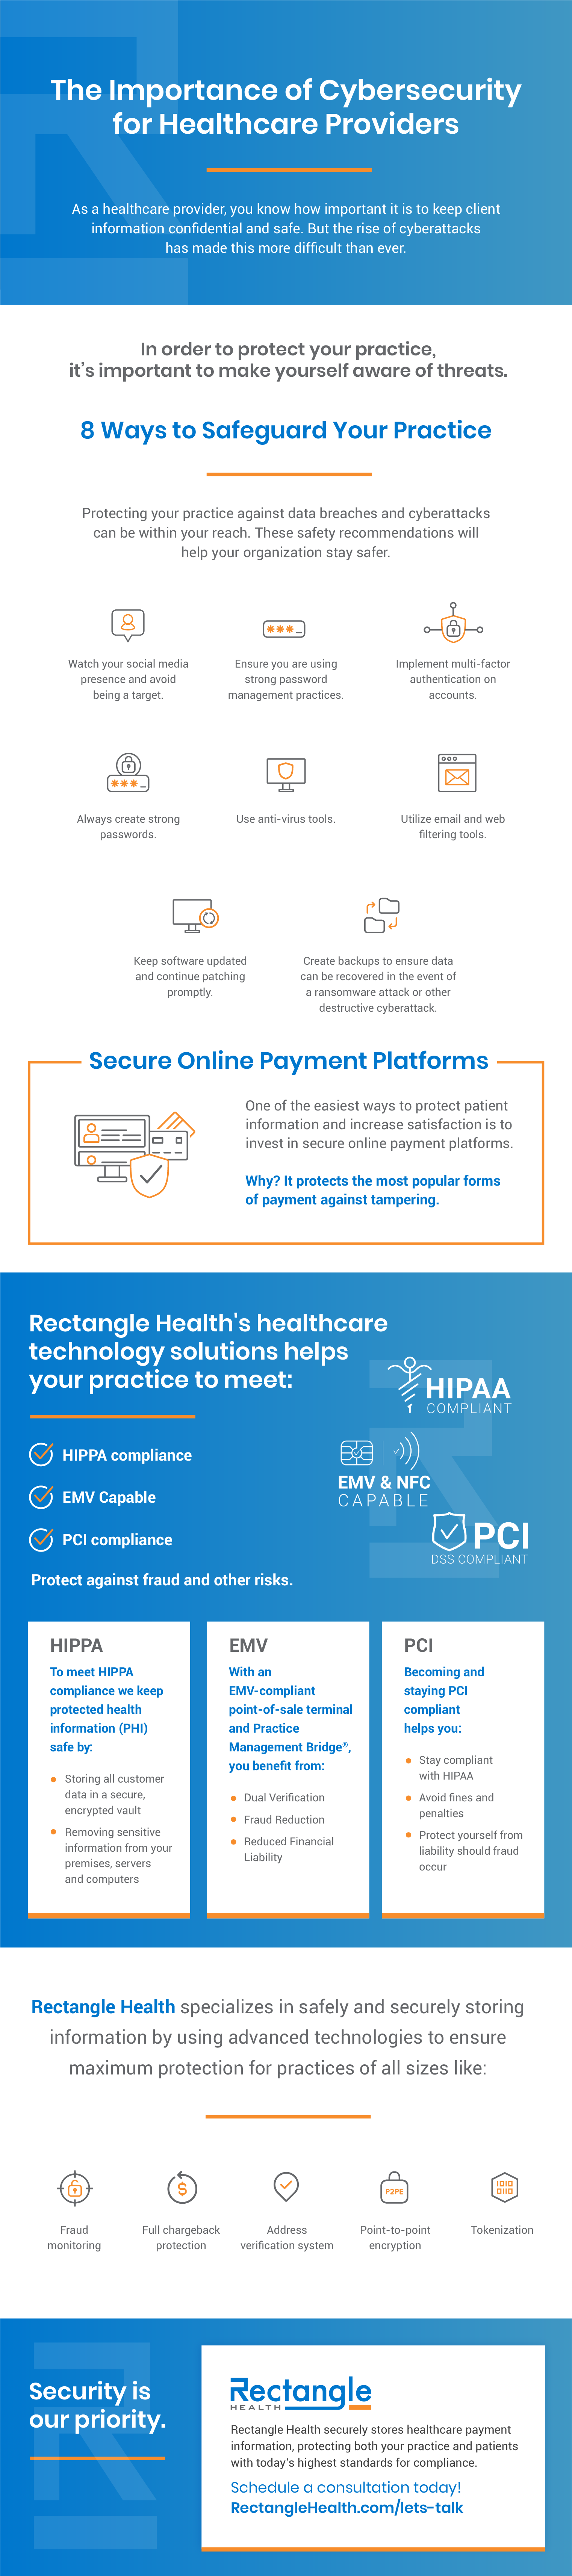 The Importance of Cybersecurity for Healthcare Providers - Infographic